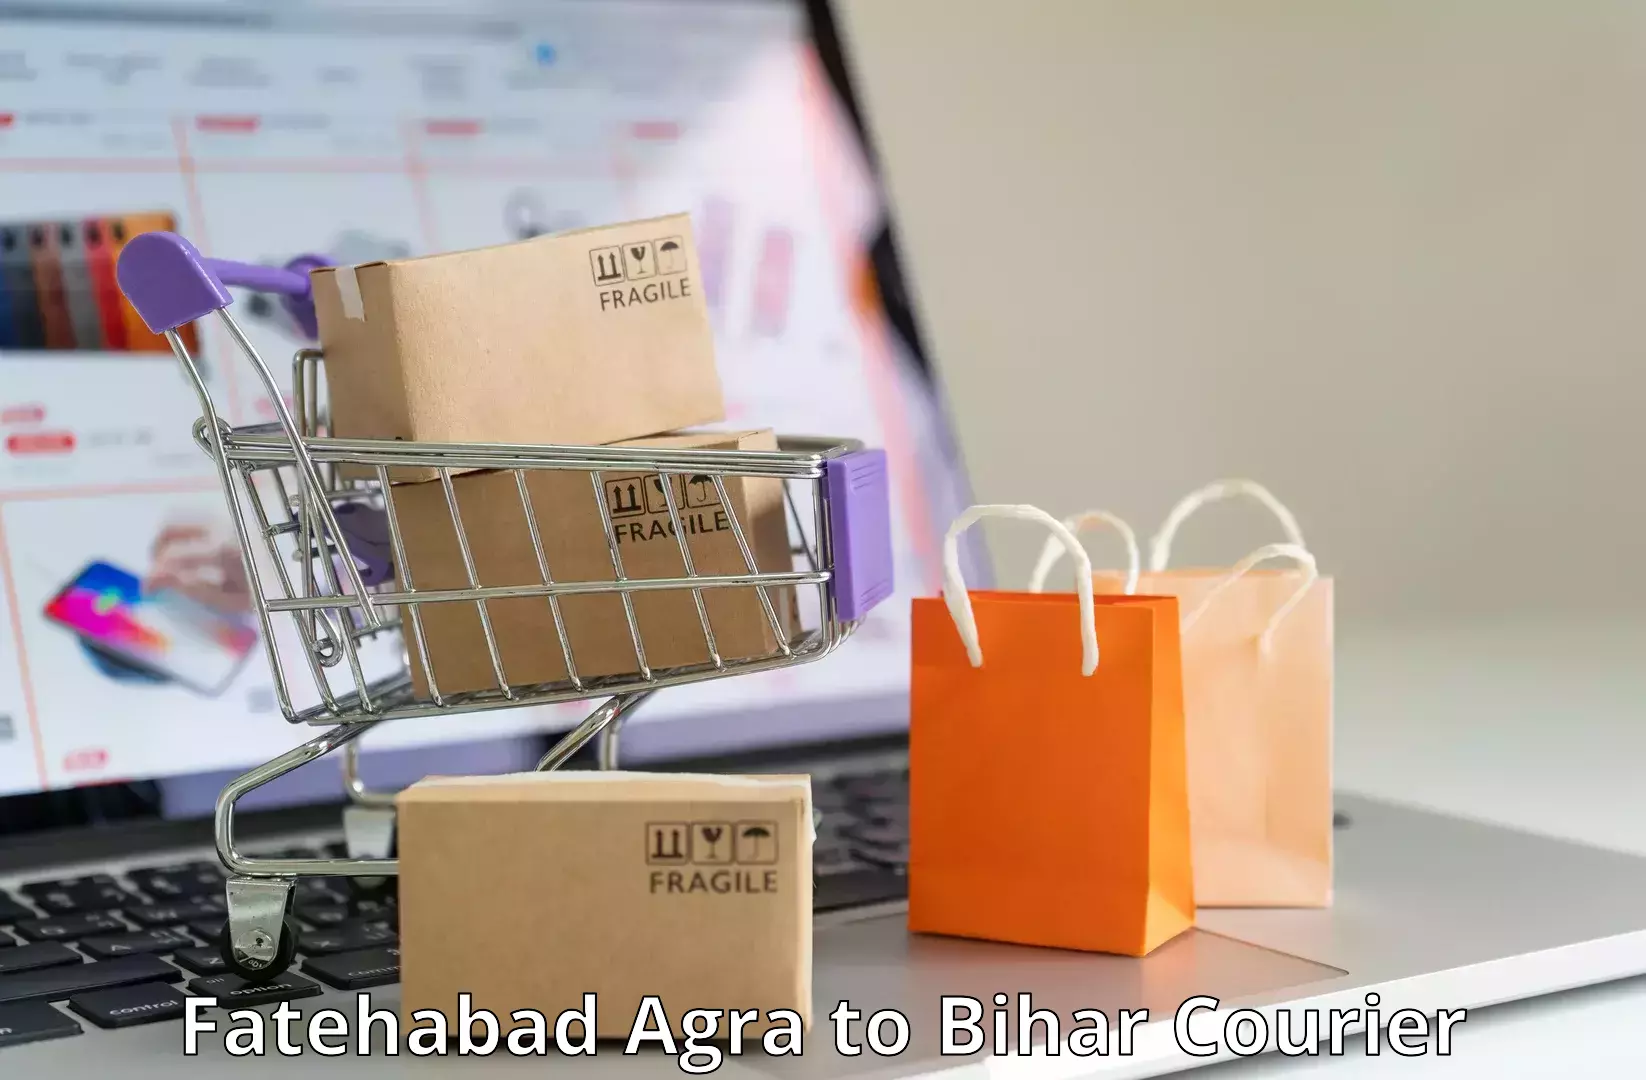 Residential courier service Fatehabad Agra to Rajpur